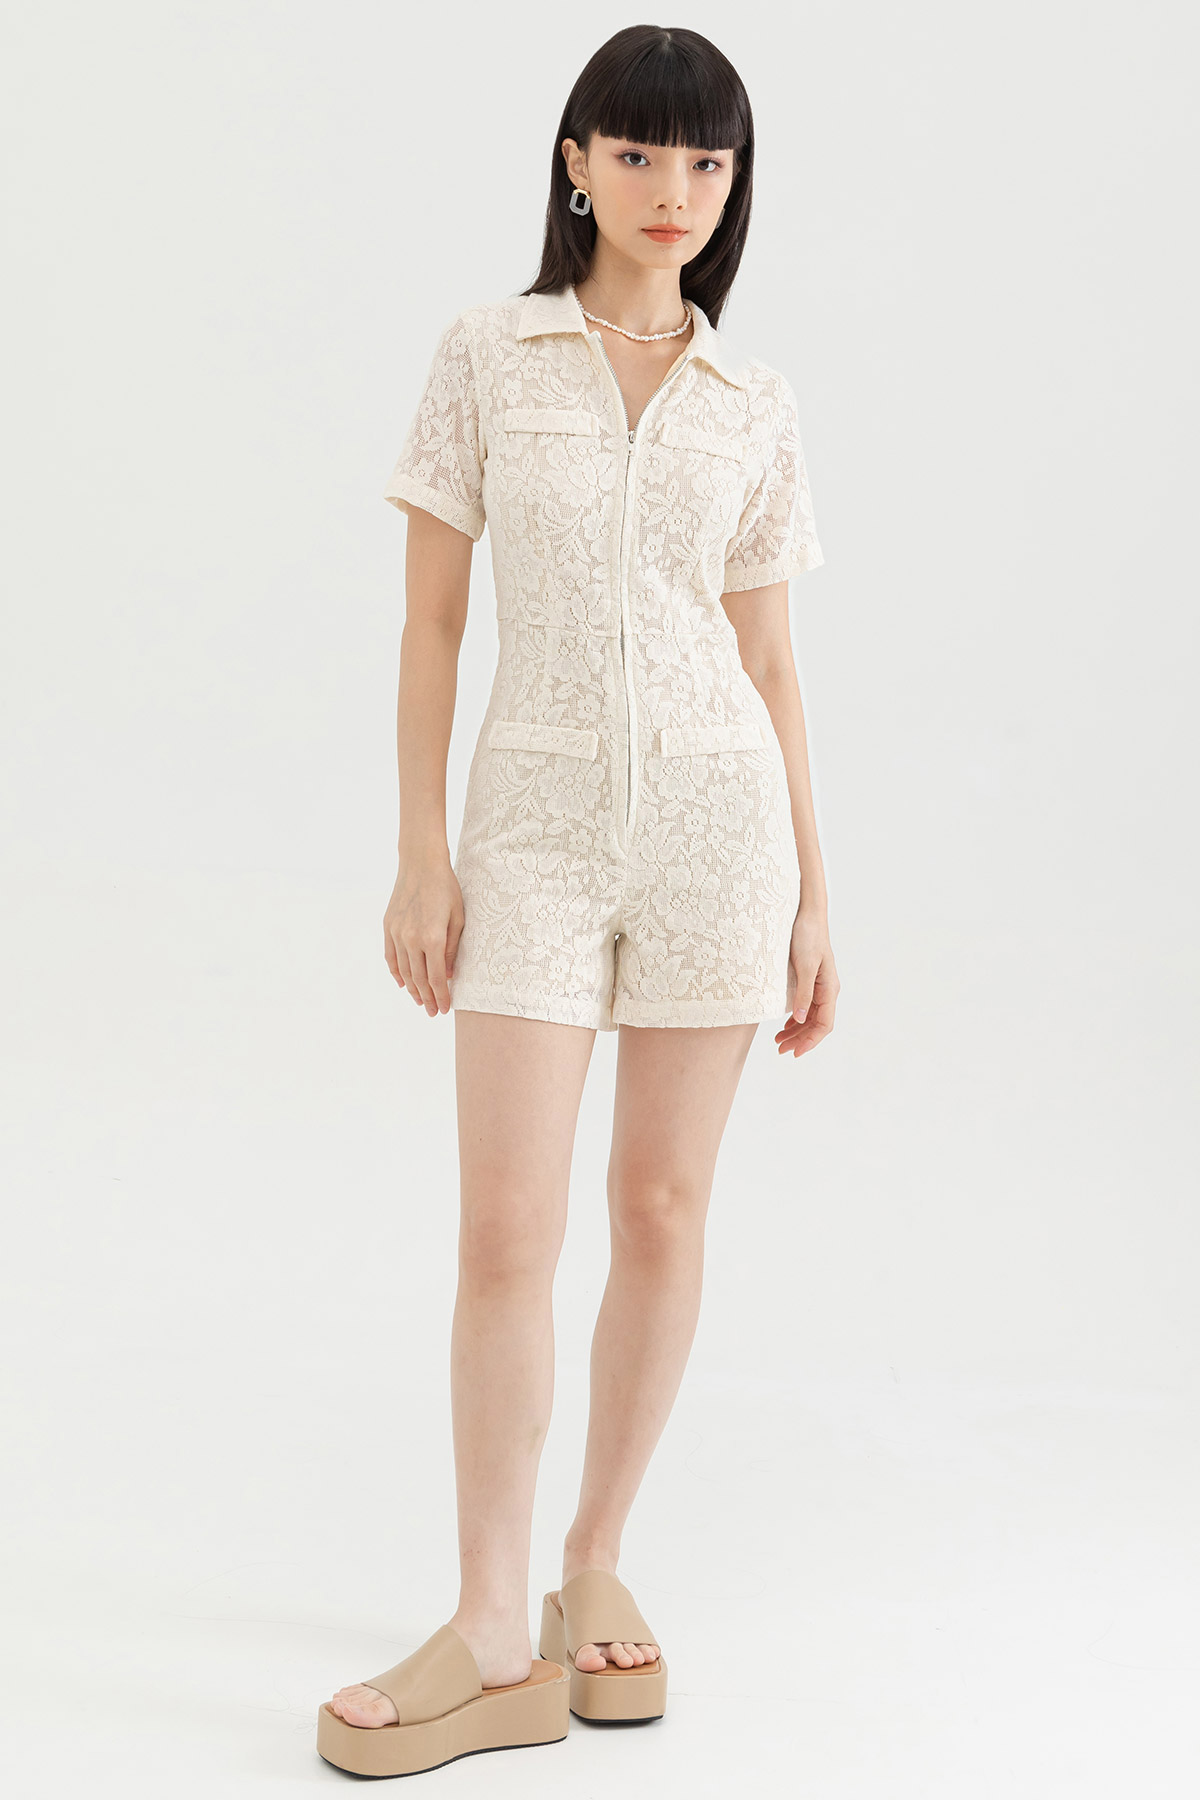 *SALE* FIELD JUMPSUIT - CHANTILLY LACE [BY MODPARADE]